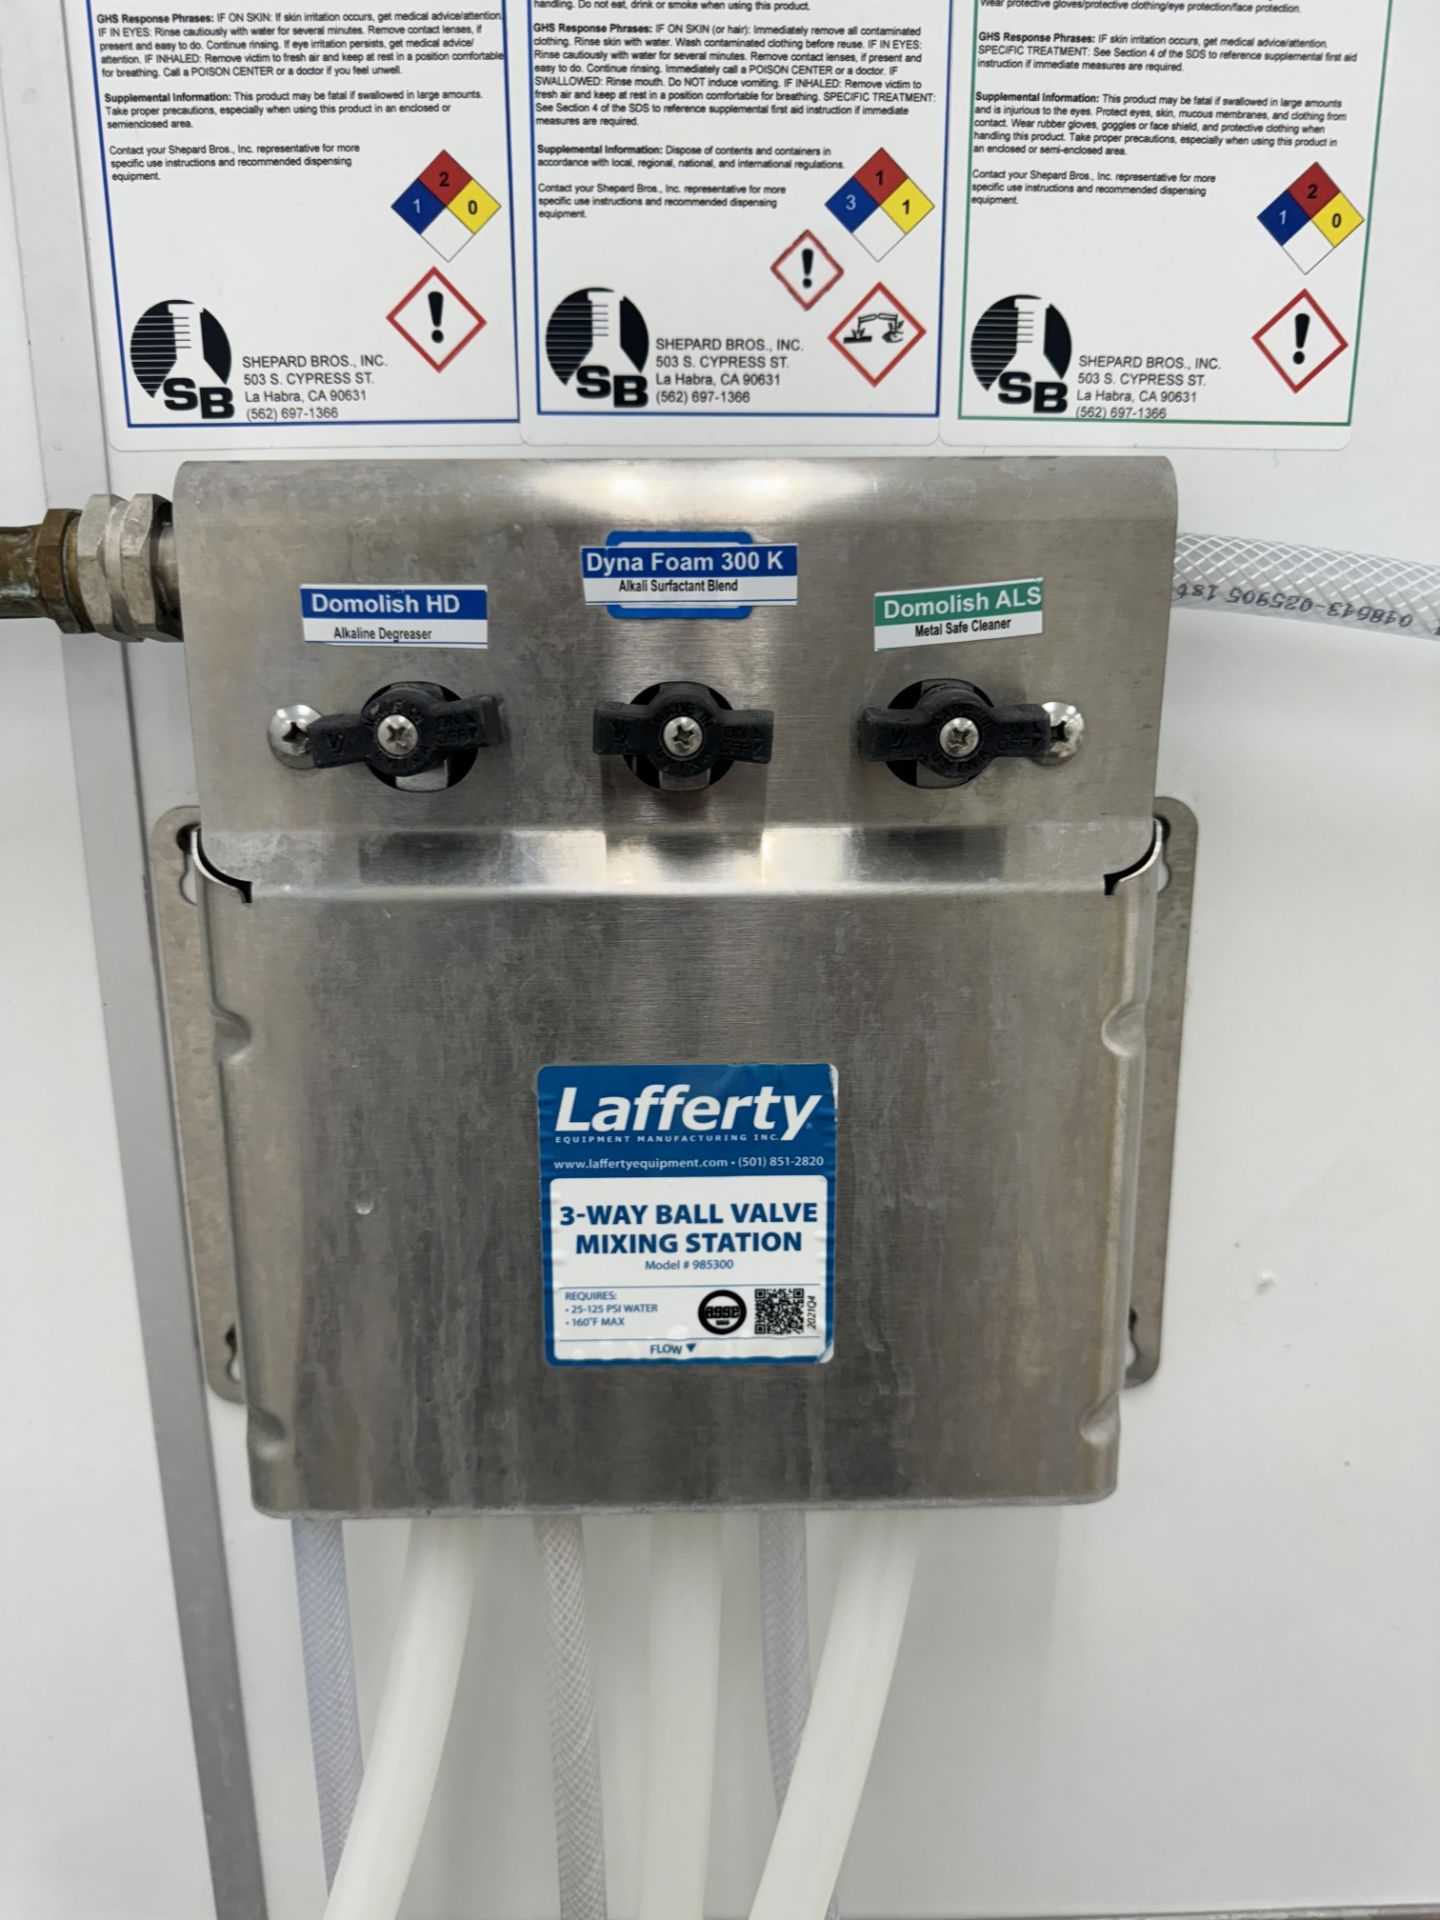 SS 3 well sink with laferty 3-way ball valve mixing station - Image 2 of 3